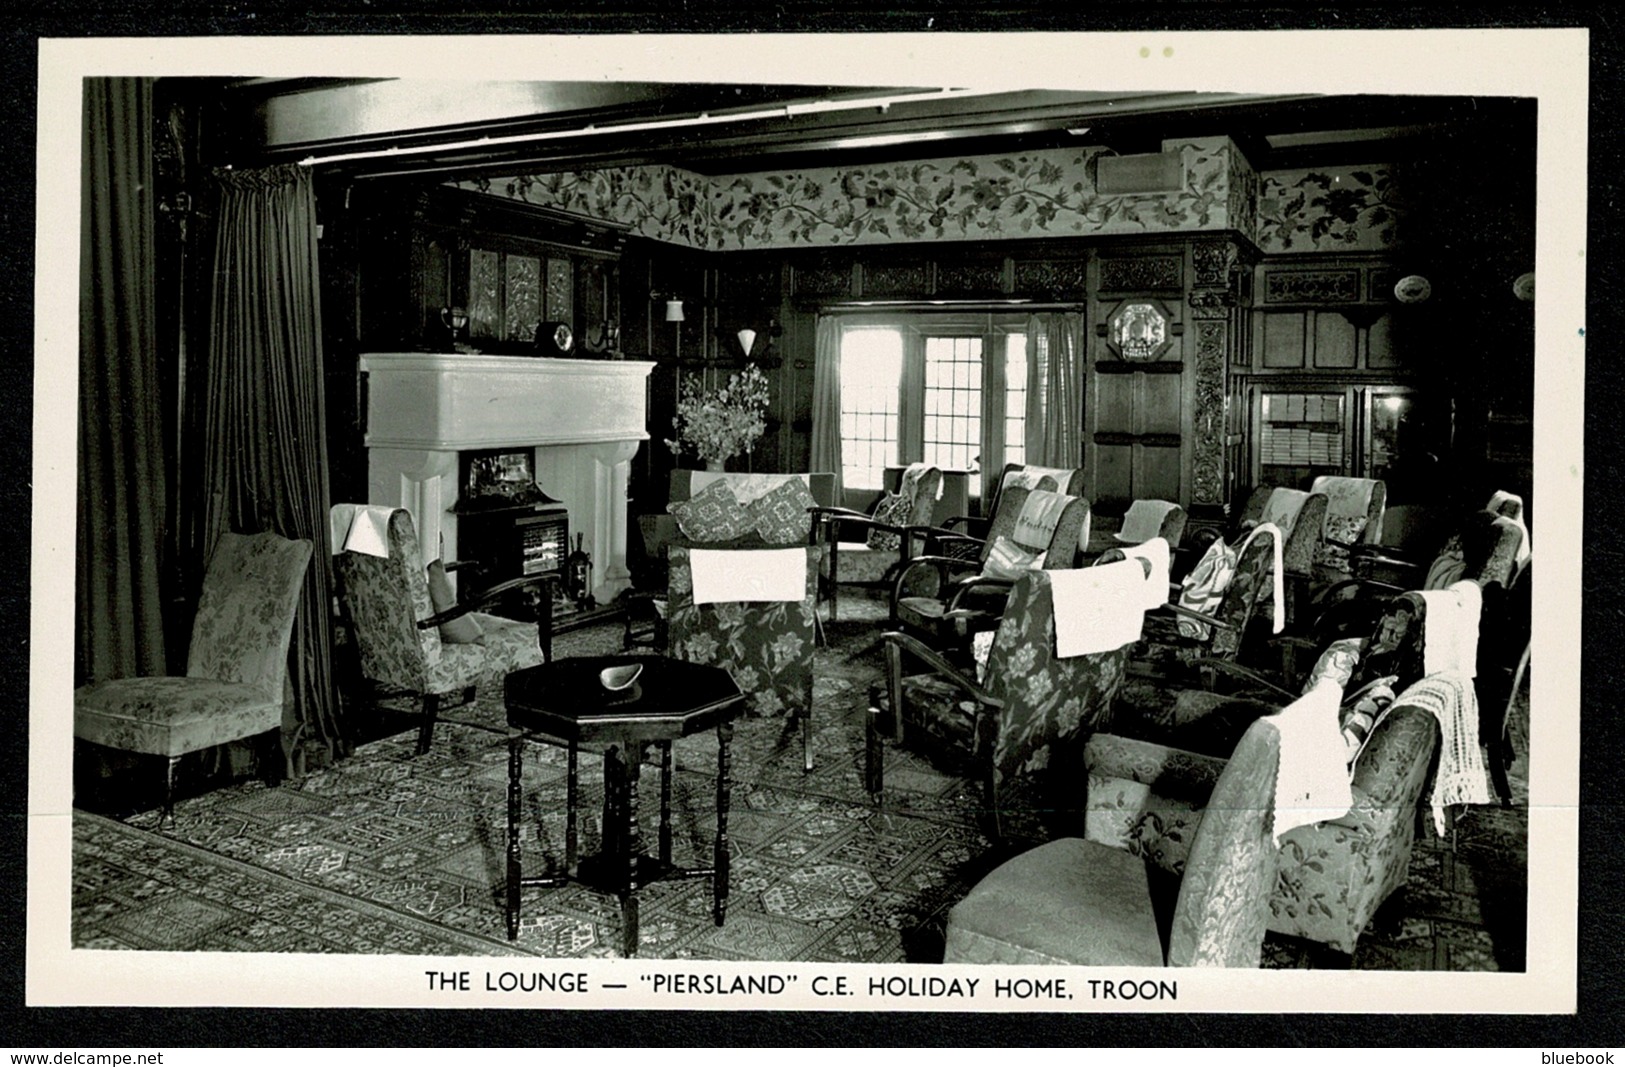 Ref 1315 - Real Photo Postcard - The Lounge "Piersland" C.E. Holiday Home Troon Ayrshire - Ayrshire